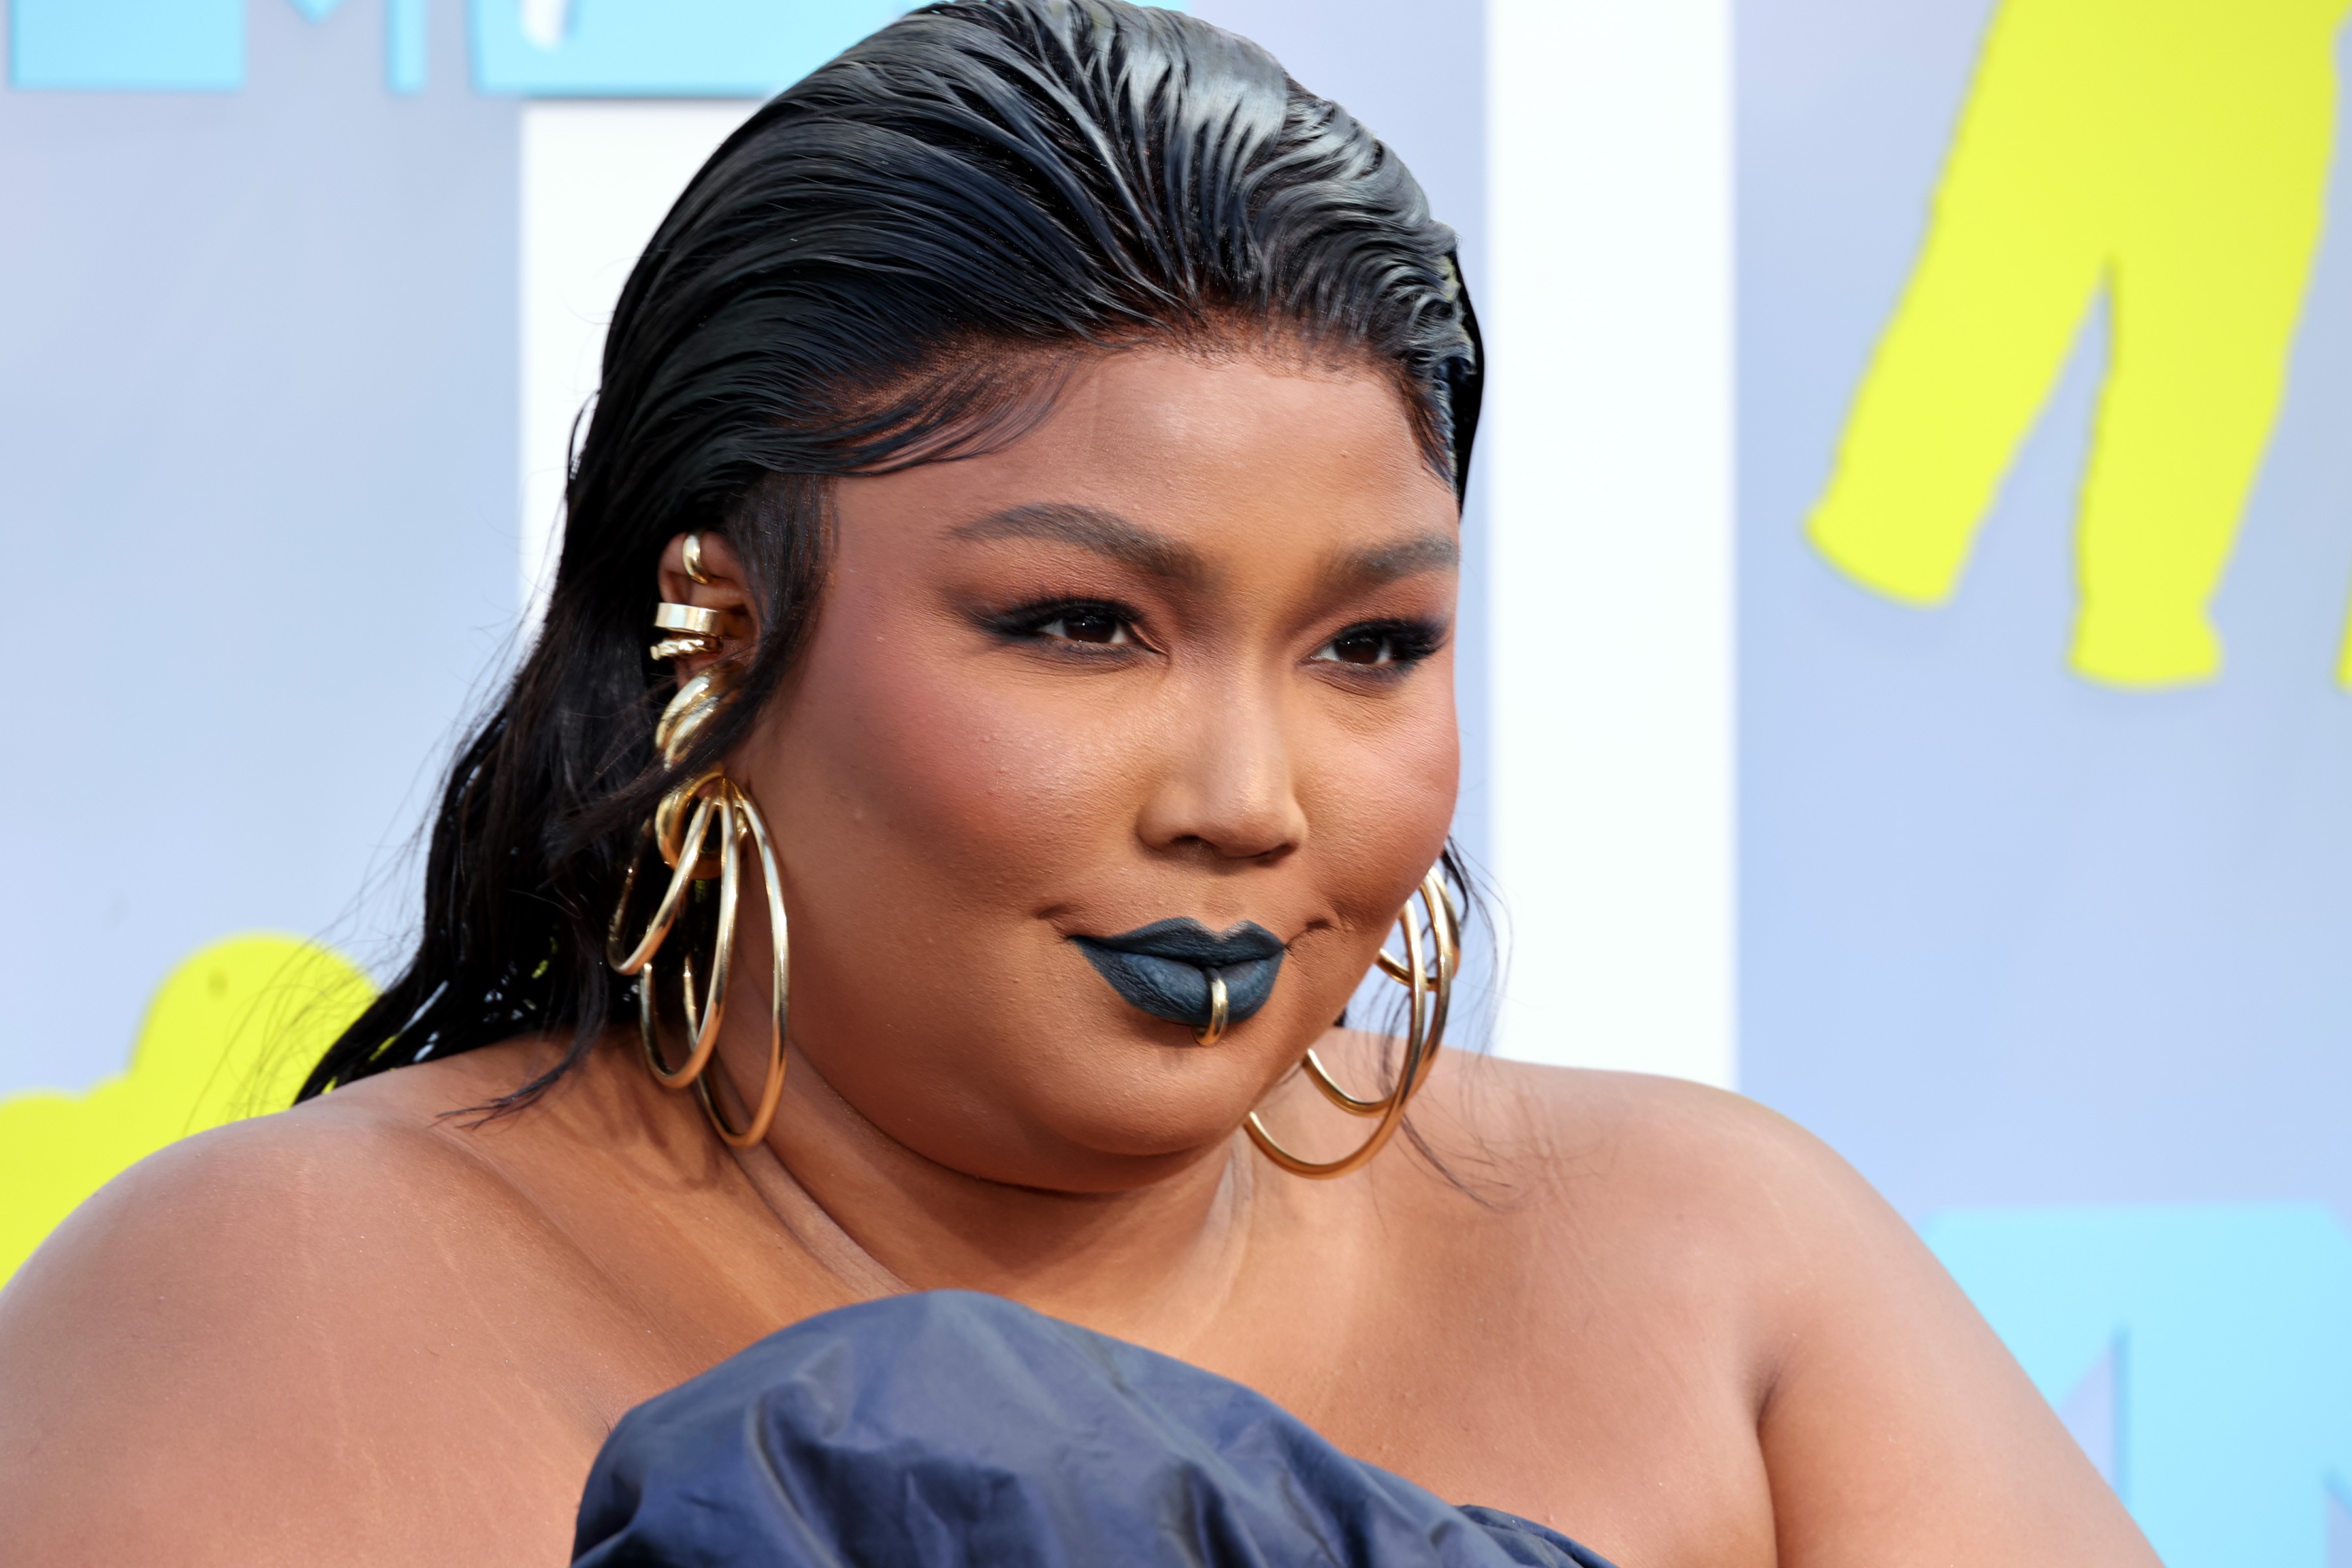 NEWARK, NEW JERSEY - AUGUST 28: Lizzo attends the 2022 MTV VMAs at Prudential Center on August 28, 2022 in Newark, New Jersey. (Photo by Cindy Ord/WireImage) (Foto: WireImage)